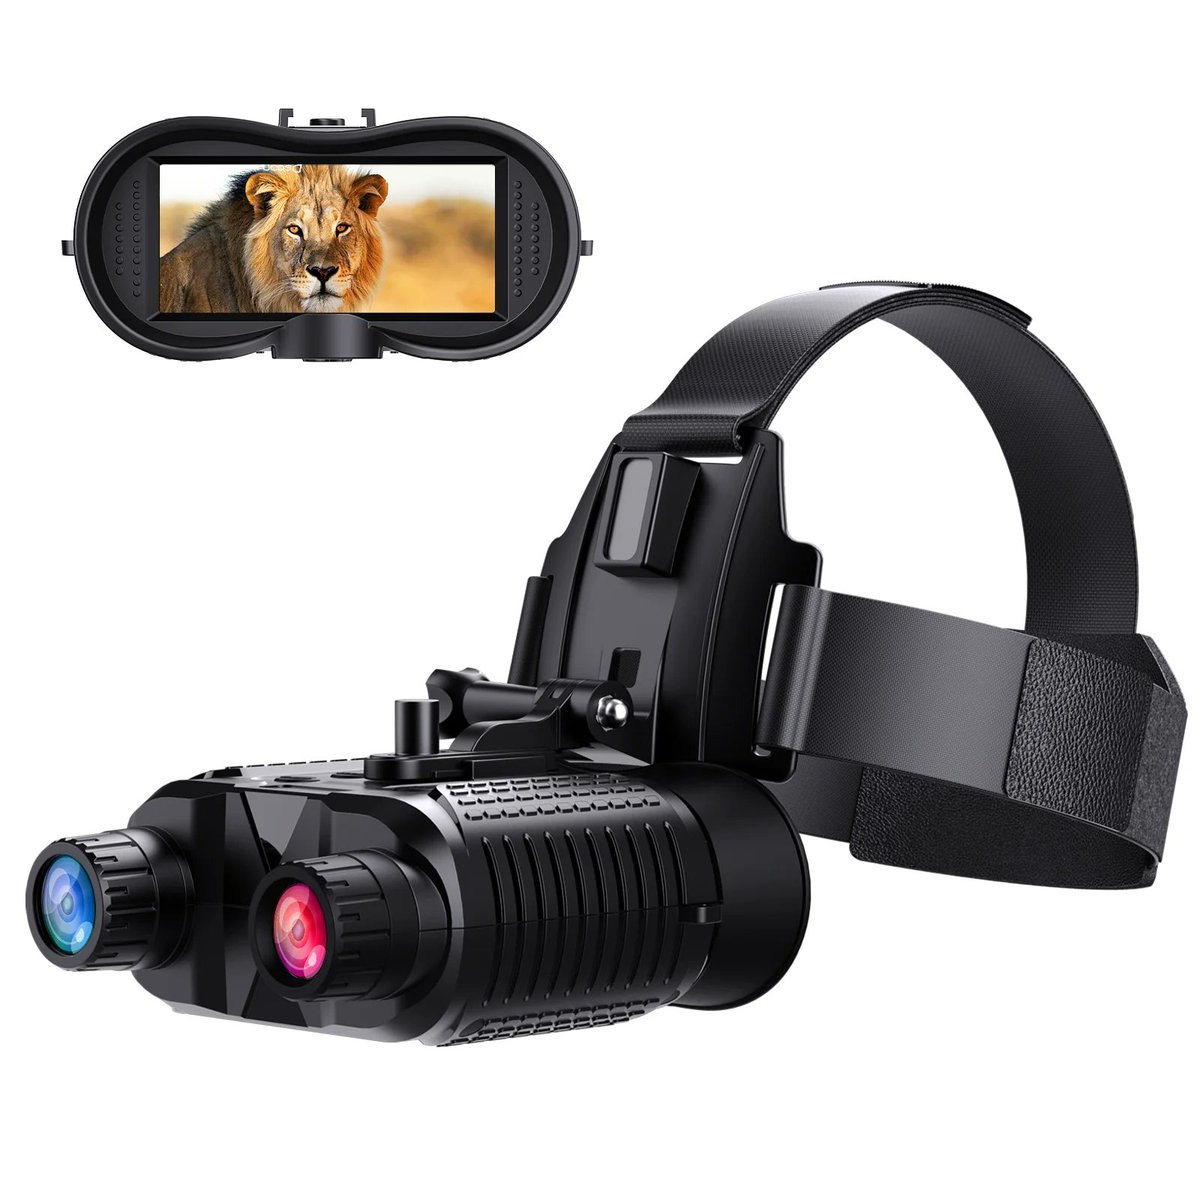 20% off entire order
Minimum purchase of $50.00
Visit our store to see more
brainstormshopping.com/products/dsoon…
#DsoonNightVisionBinoculars #NV8160 #Binoculars #HeadMountGoggles #InfraredVision #DigitalBinoculars #CampingEquipment #NightVisionTechnology #OutdoorGear #Surveillance  #Hunting